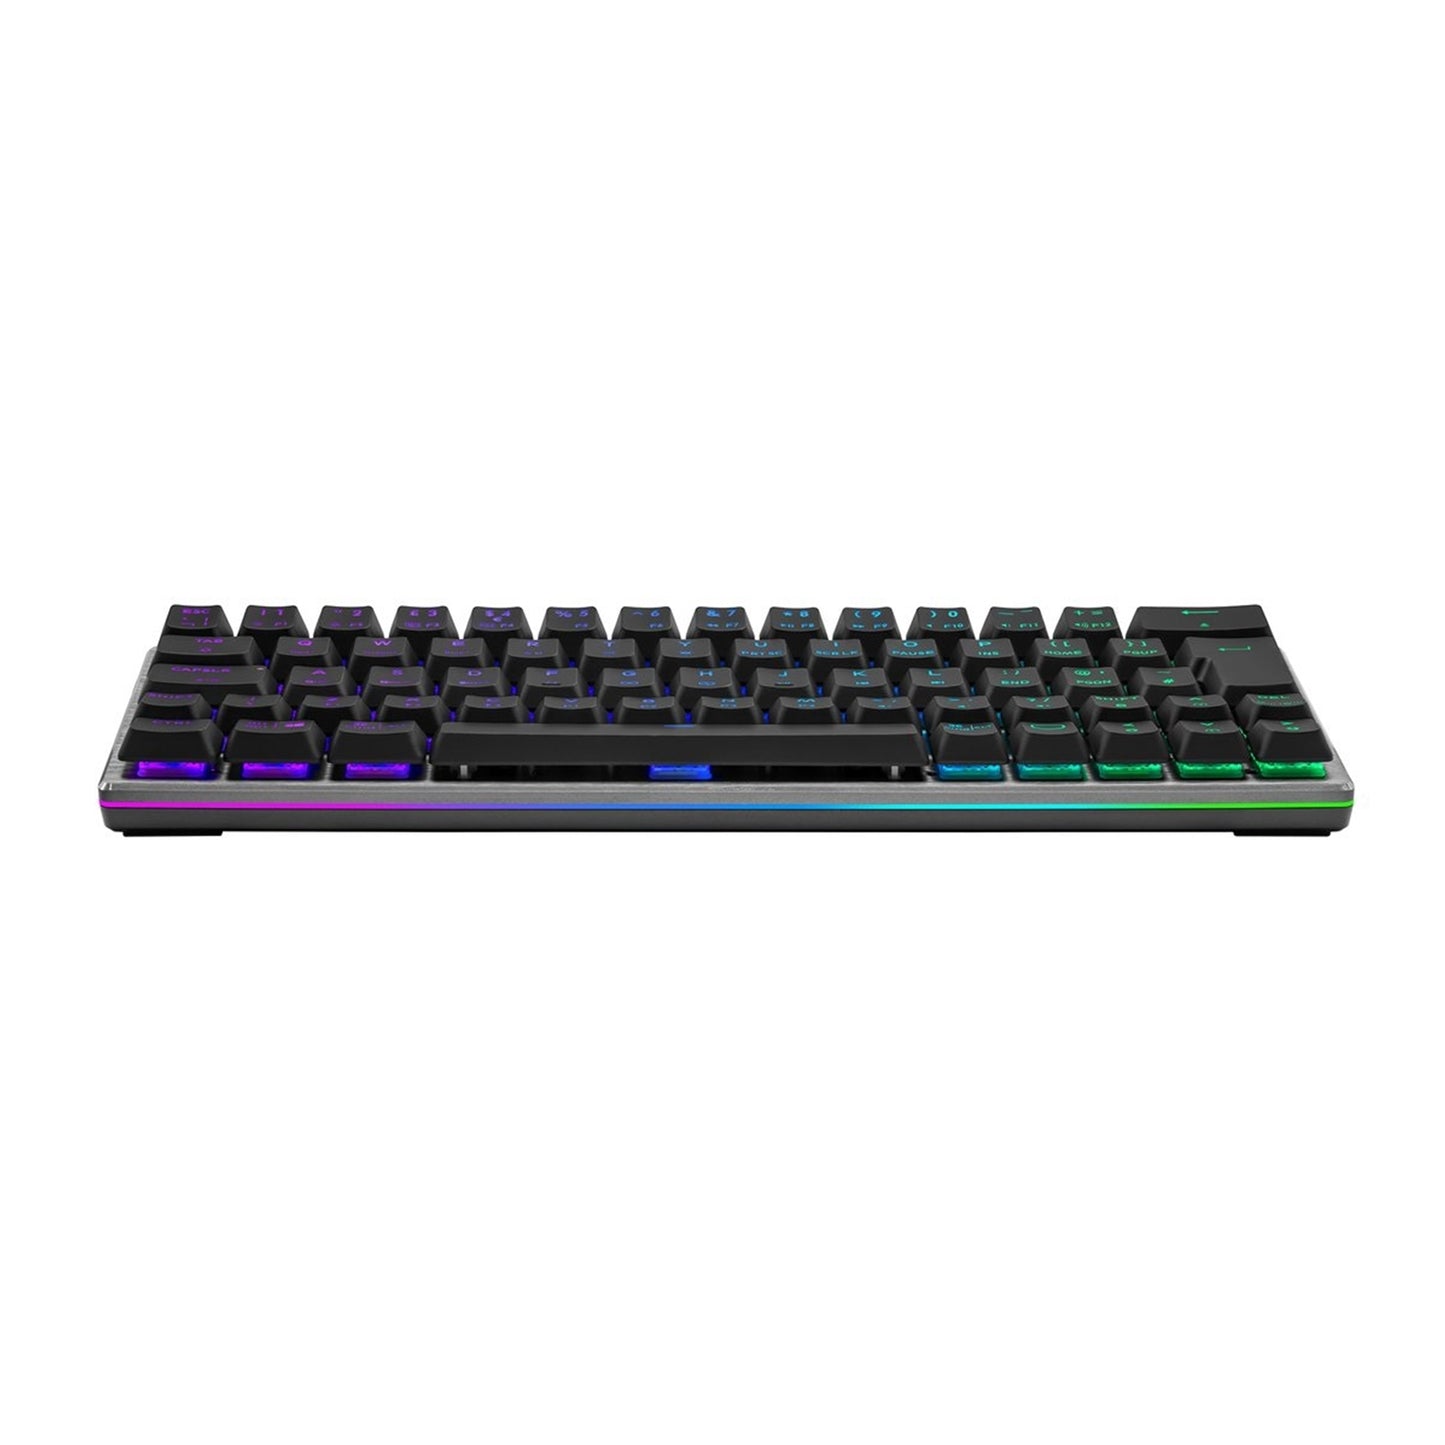 Cooler Master SK622 60% Compact Wireless PC Gaming Keyboard Space Grey with Red Switches